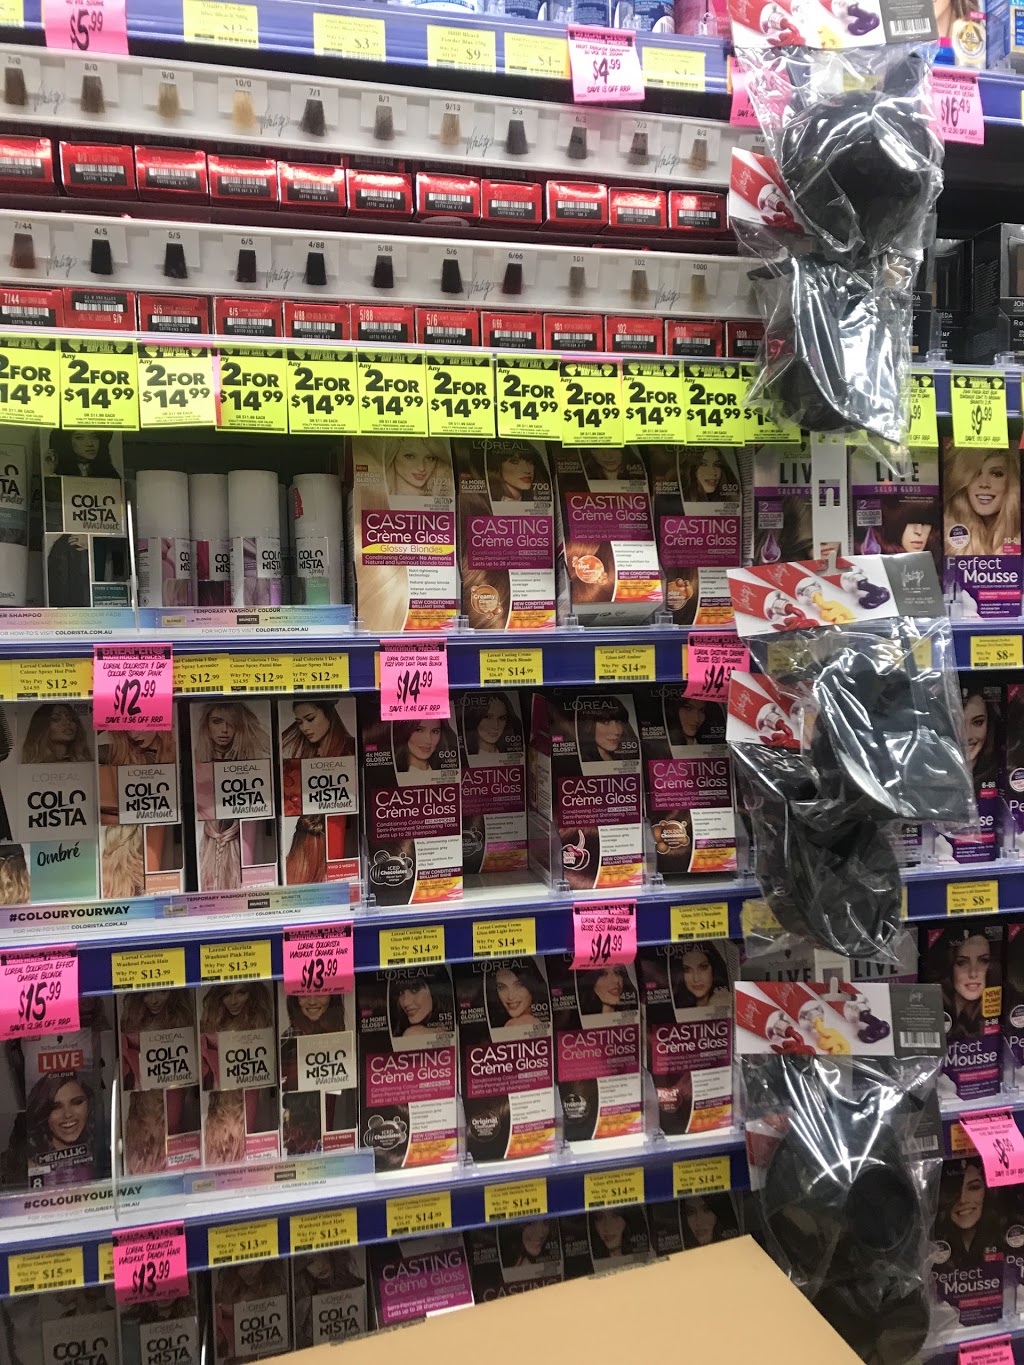 Chemist Warehouse Watergardens Town Centre | pharmacy | 399 Melton Hwy Shop A005 Watergardens S/C, Taylors Lakes VIC 3038, Australia | 0383616322 OR +61 3 8361 6322